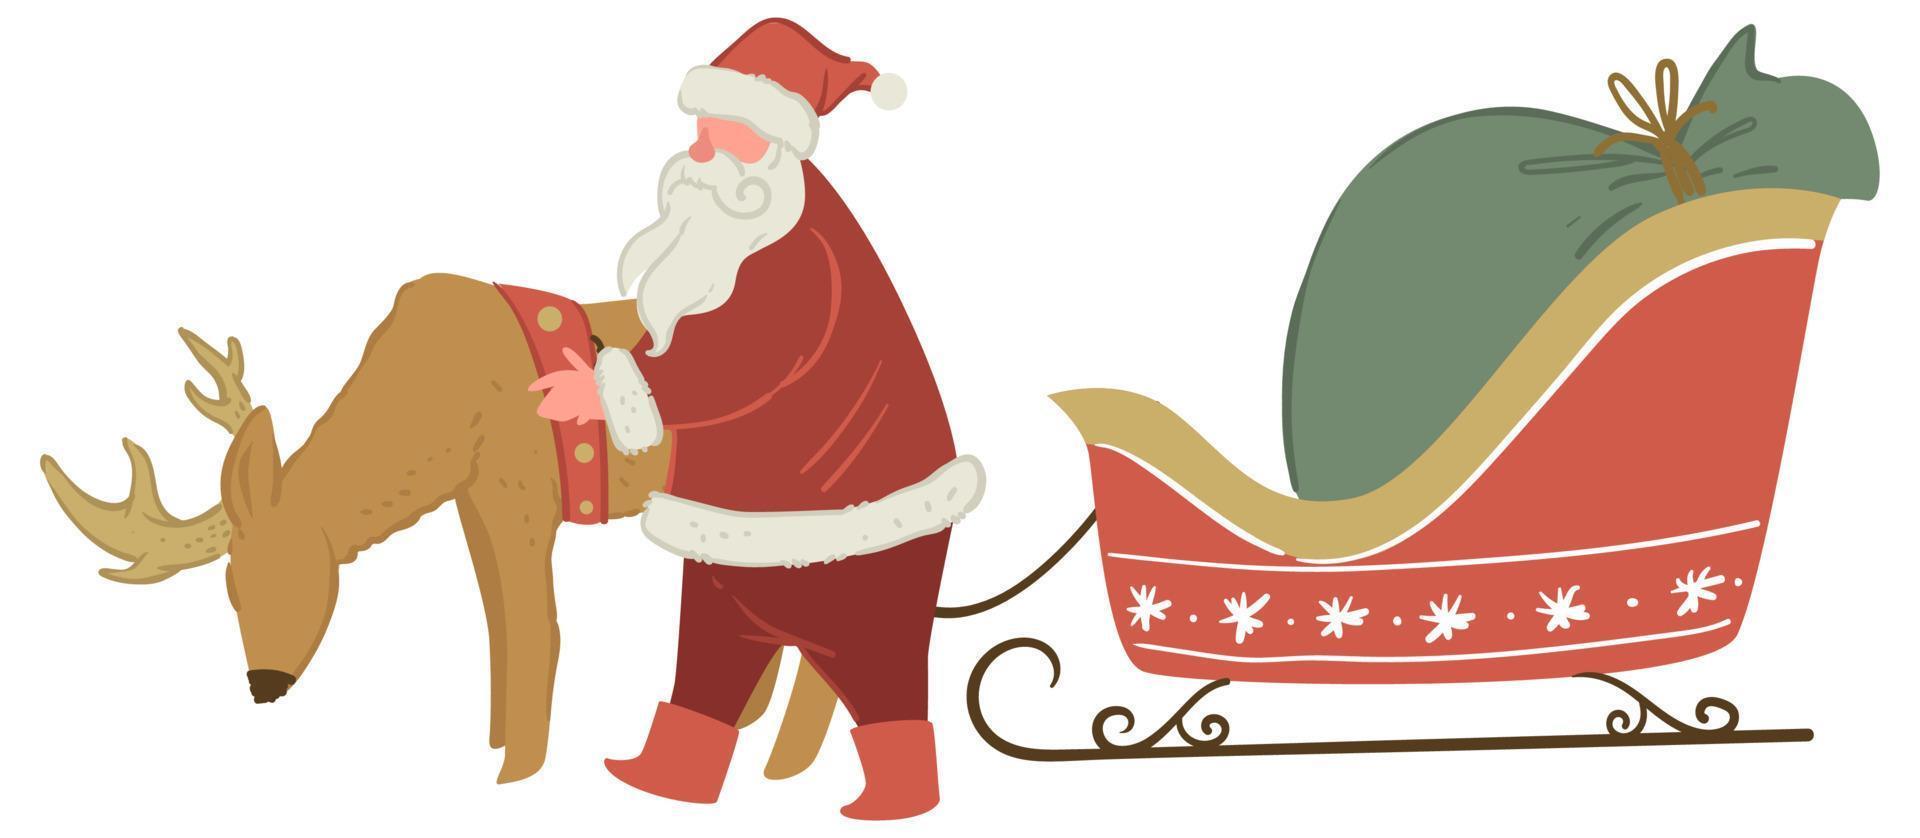 Santa Claus with deer and sled full of presents vector